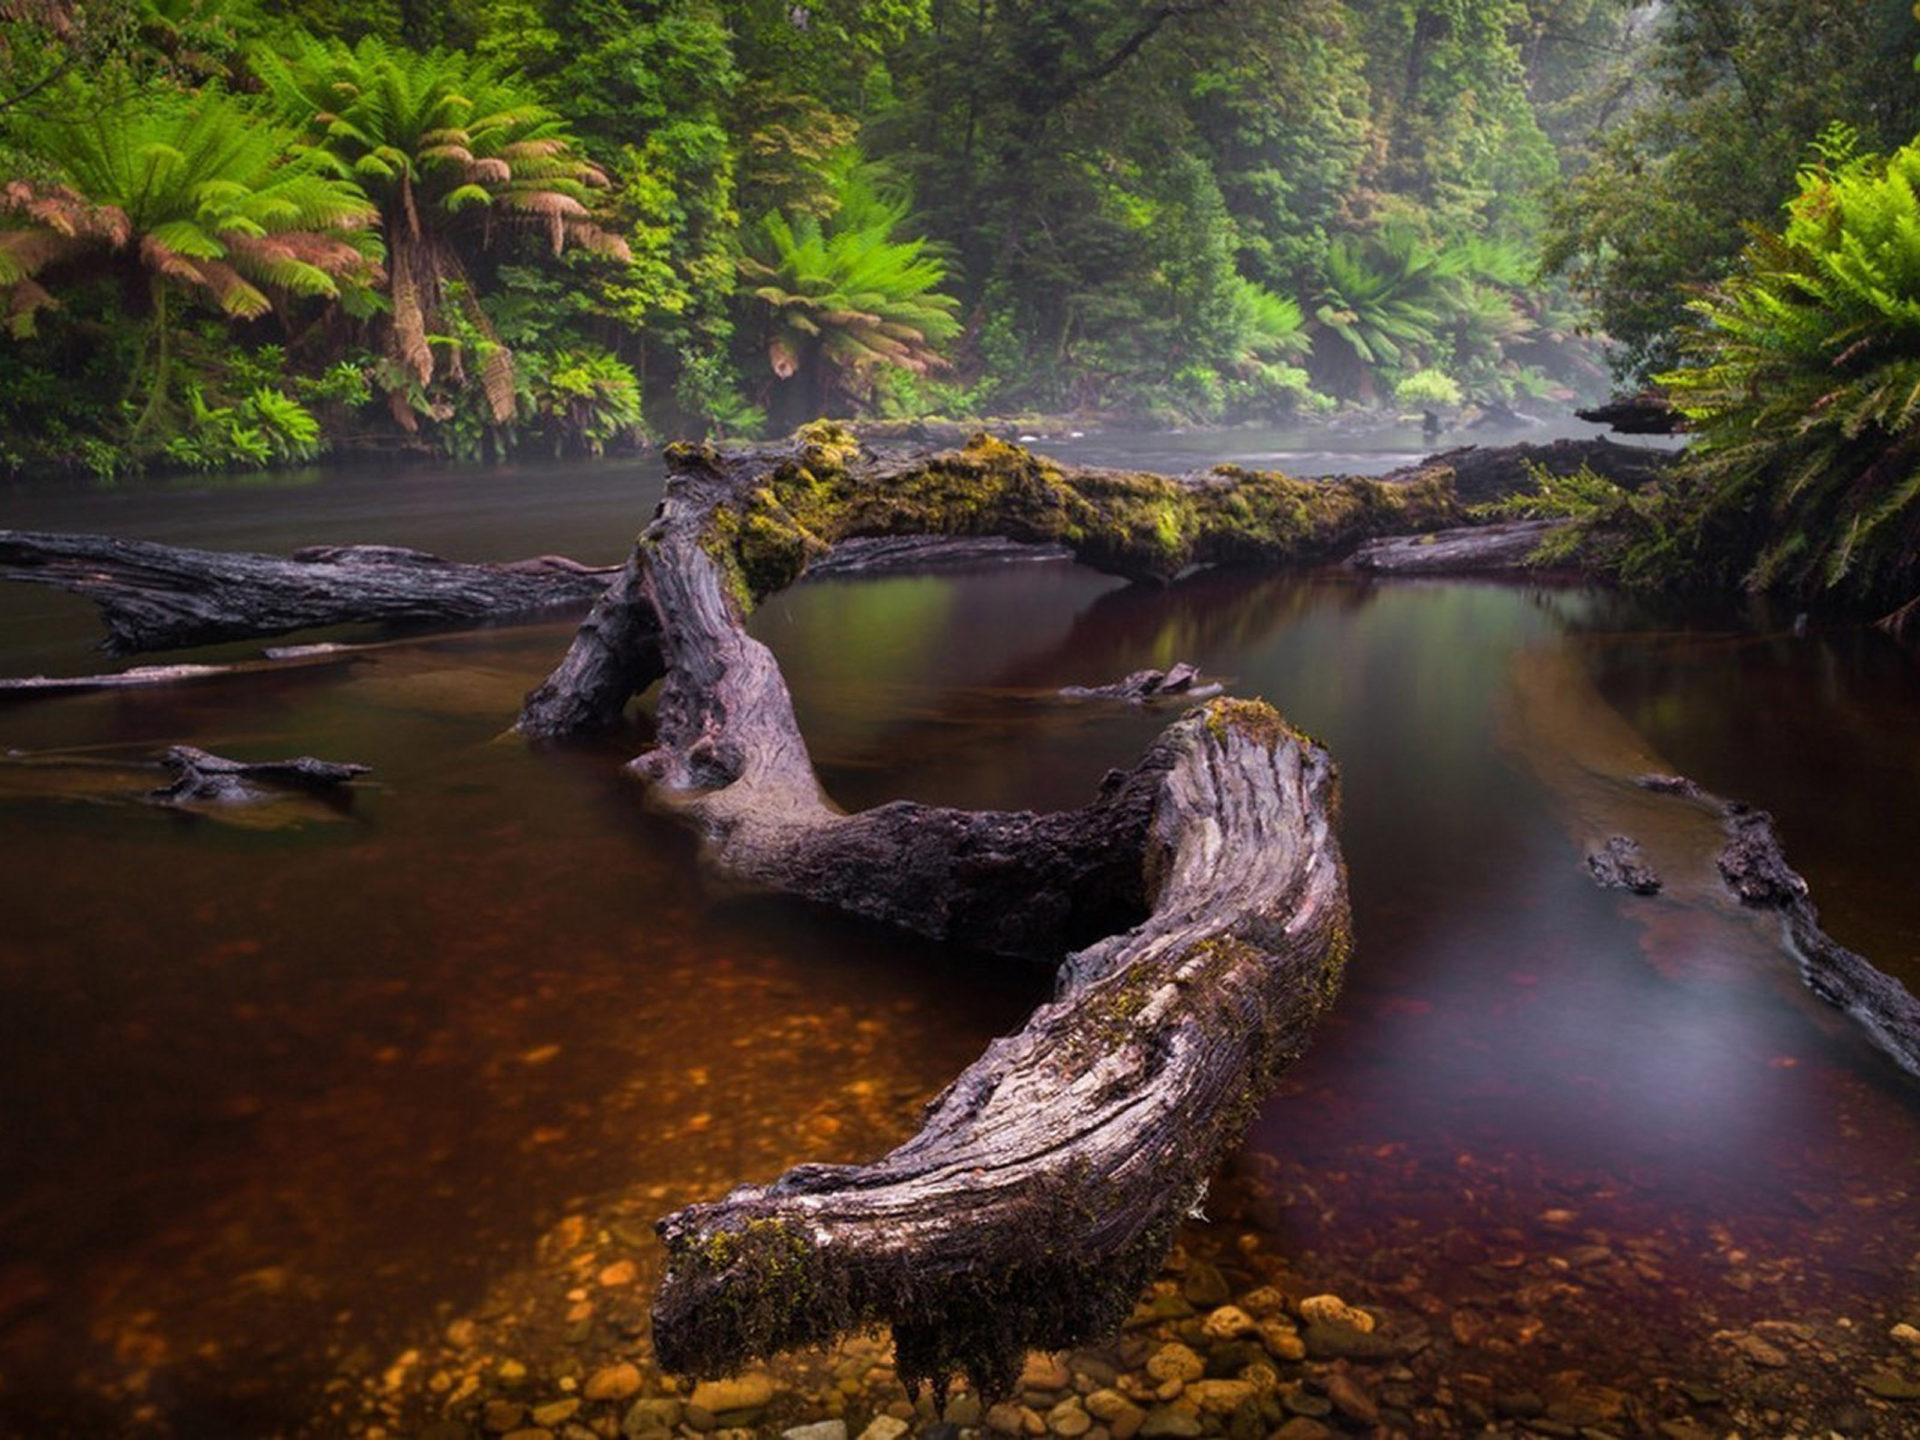 River Rain Forest Fallen Trees Logs With Green Moss Dark Water Dense Forest With Trees And Fern Evaporation Landscape Wallpaper HD 3840x2160, Wallpaper13.com